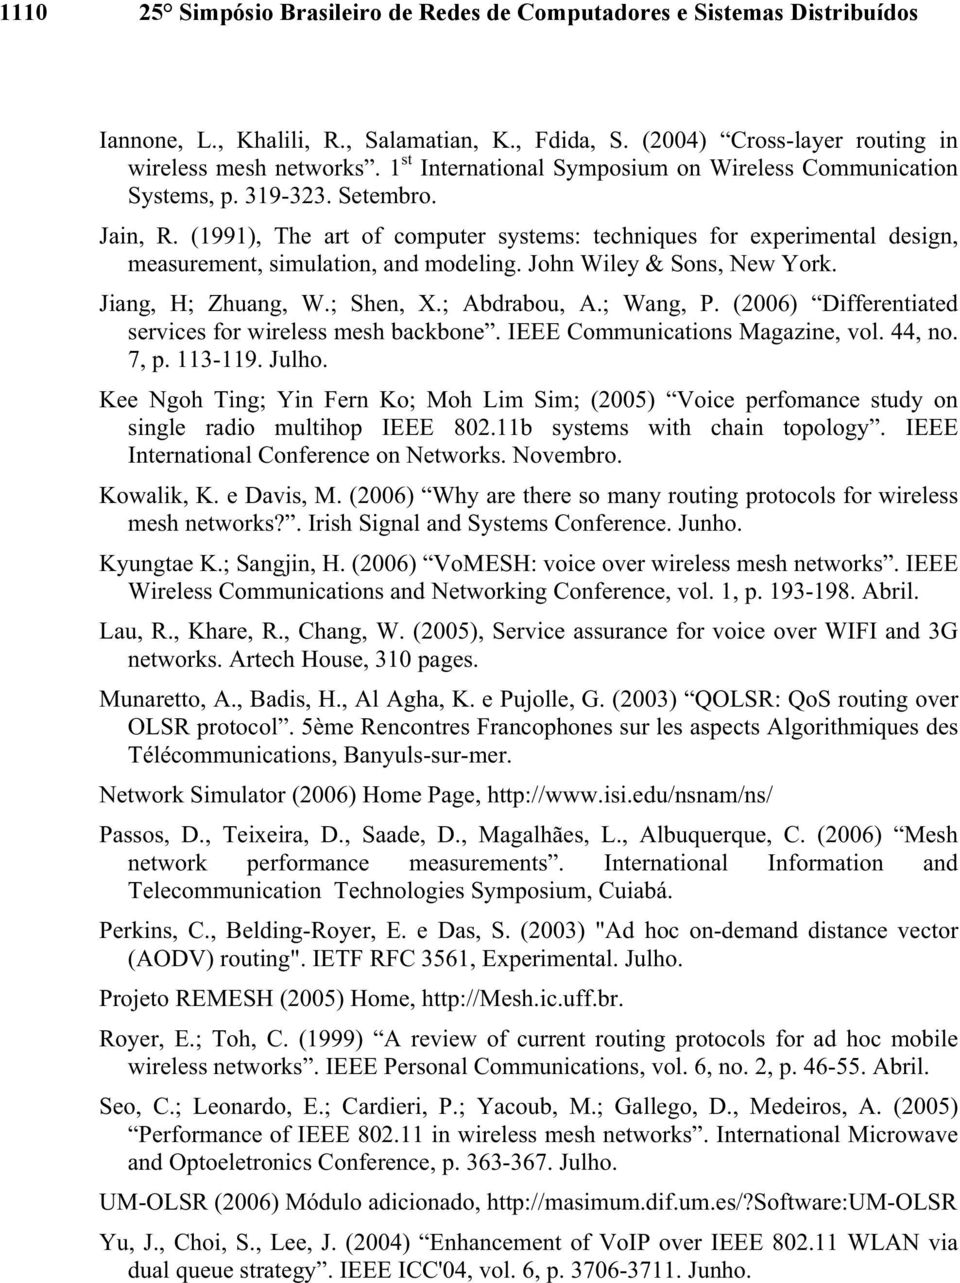 (1991), The art of computer systems: techniques for experimental design, measurement, simulation, and modeling. John Wiley & Sons, New York. Jiang, H; Zhuang, W.; Shen, X.; Abdrabou, A.; Wang, P.